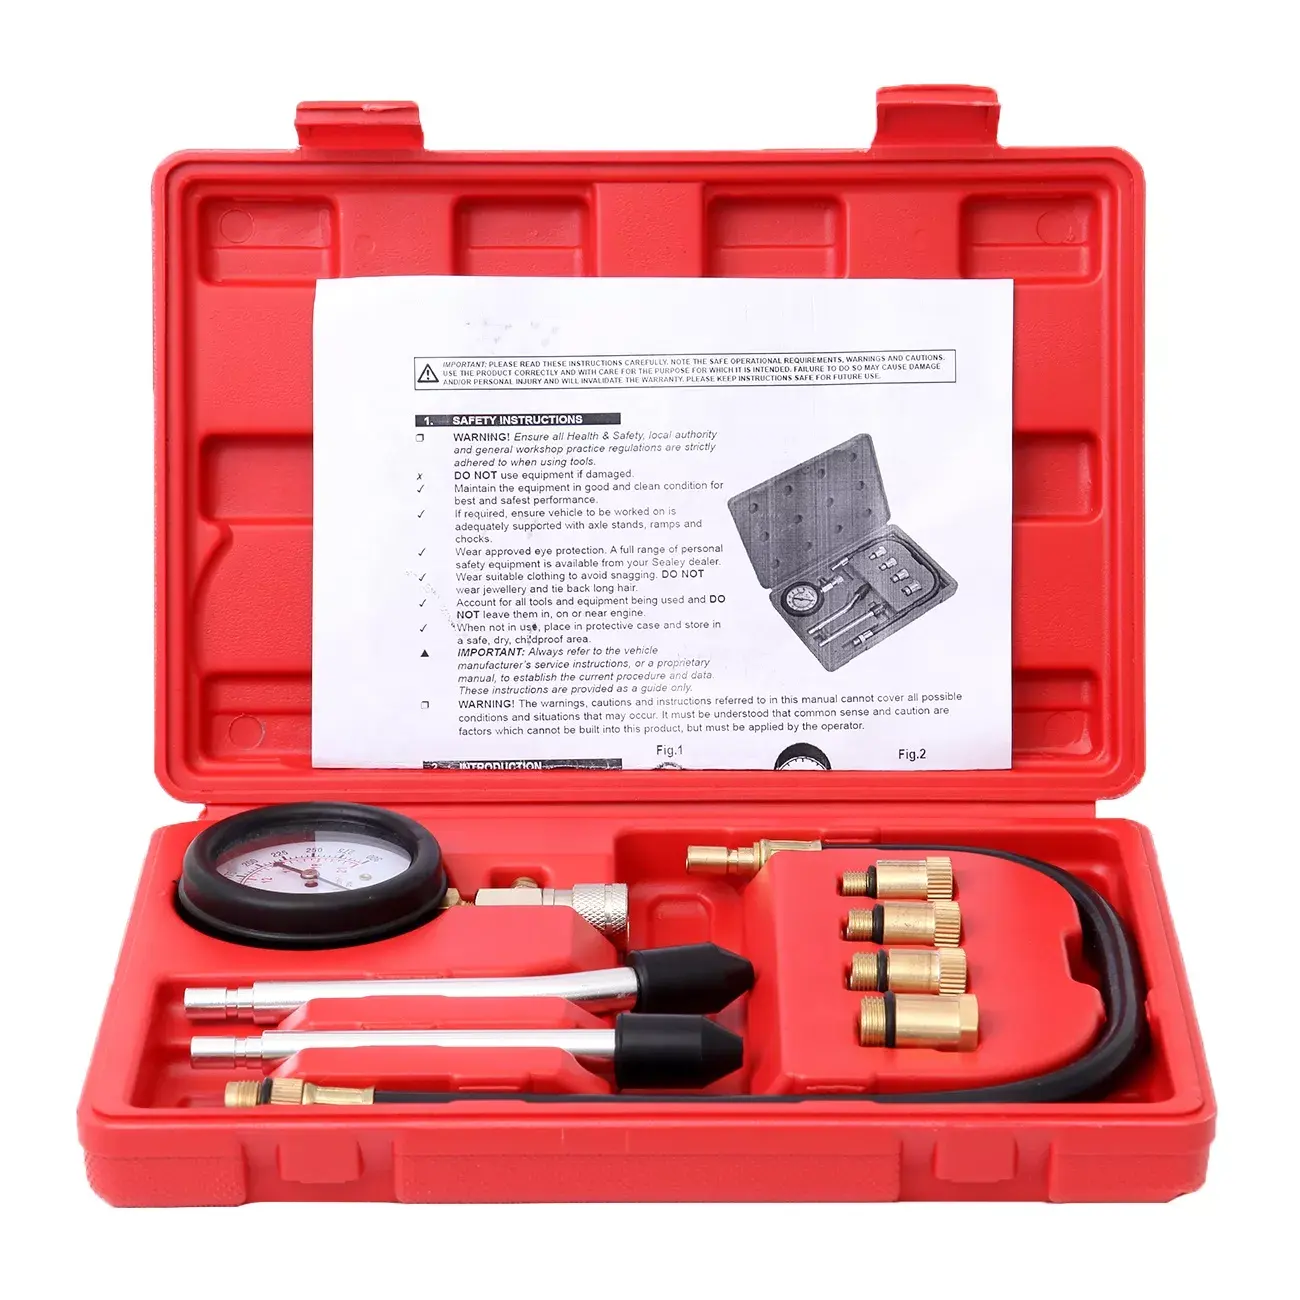 8PCS Petrol Engine Cylinder Compression Tester Kit Automotive Tool Gauge Repair Tools for Most Cars Trucks And Other Vehicles